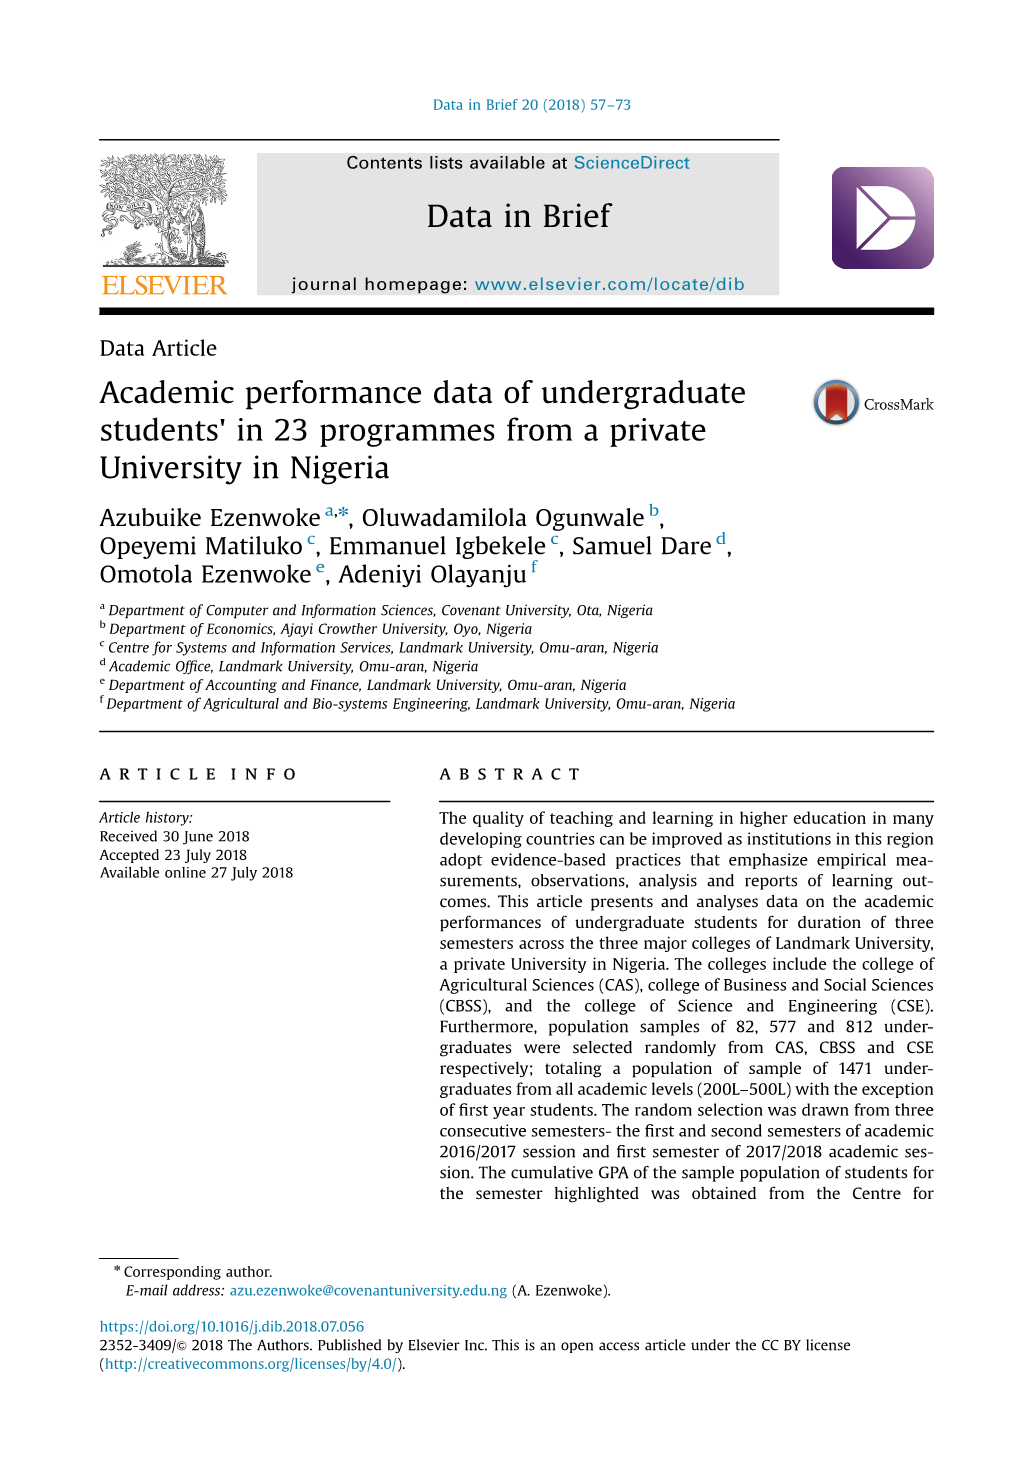 Academic Performance Data of Undergraduate Students' in 23 Programmes from a Private University in Nigeria Data in Brief